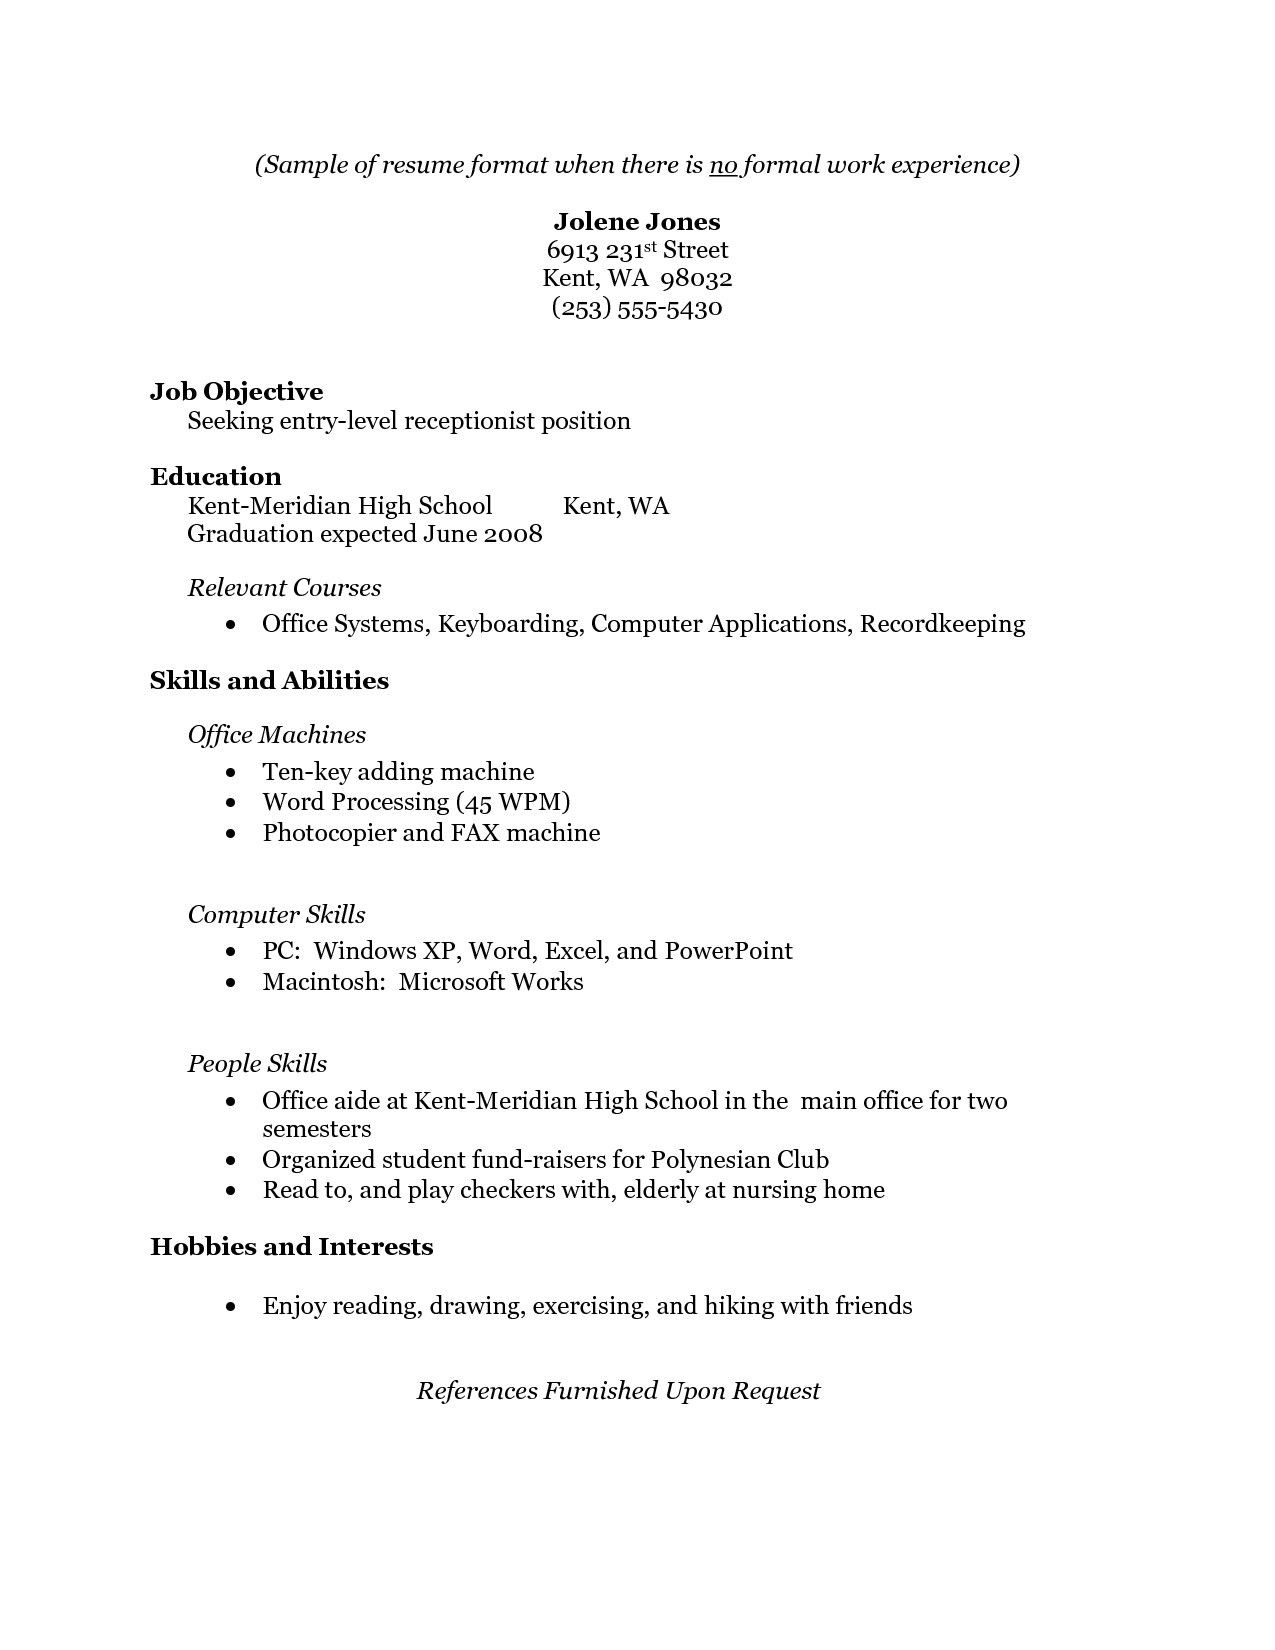 Resume Examples for Students with No Work Experience Template Free Resume Templates No Work Experience #experience …